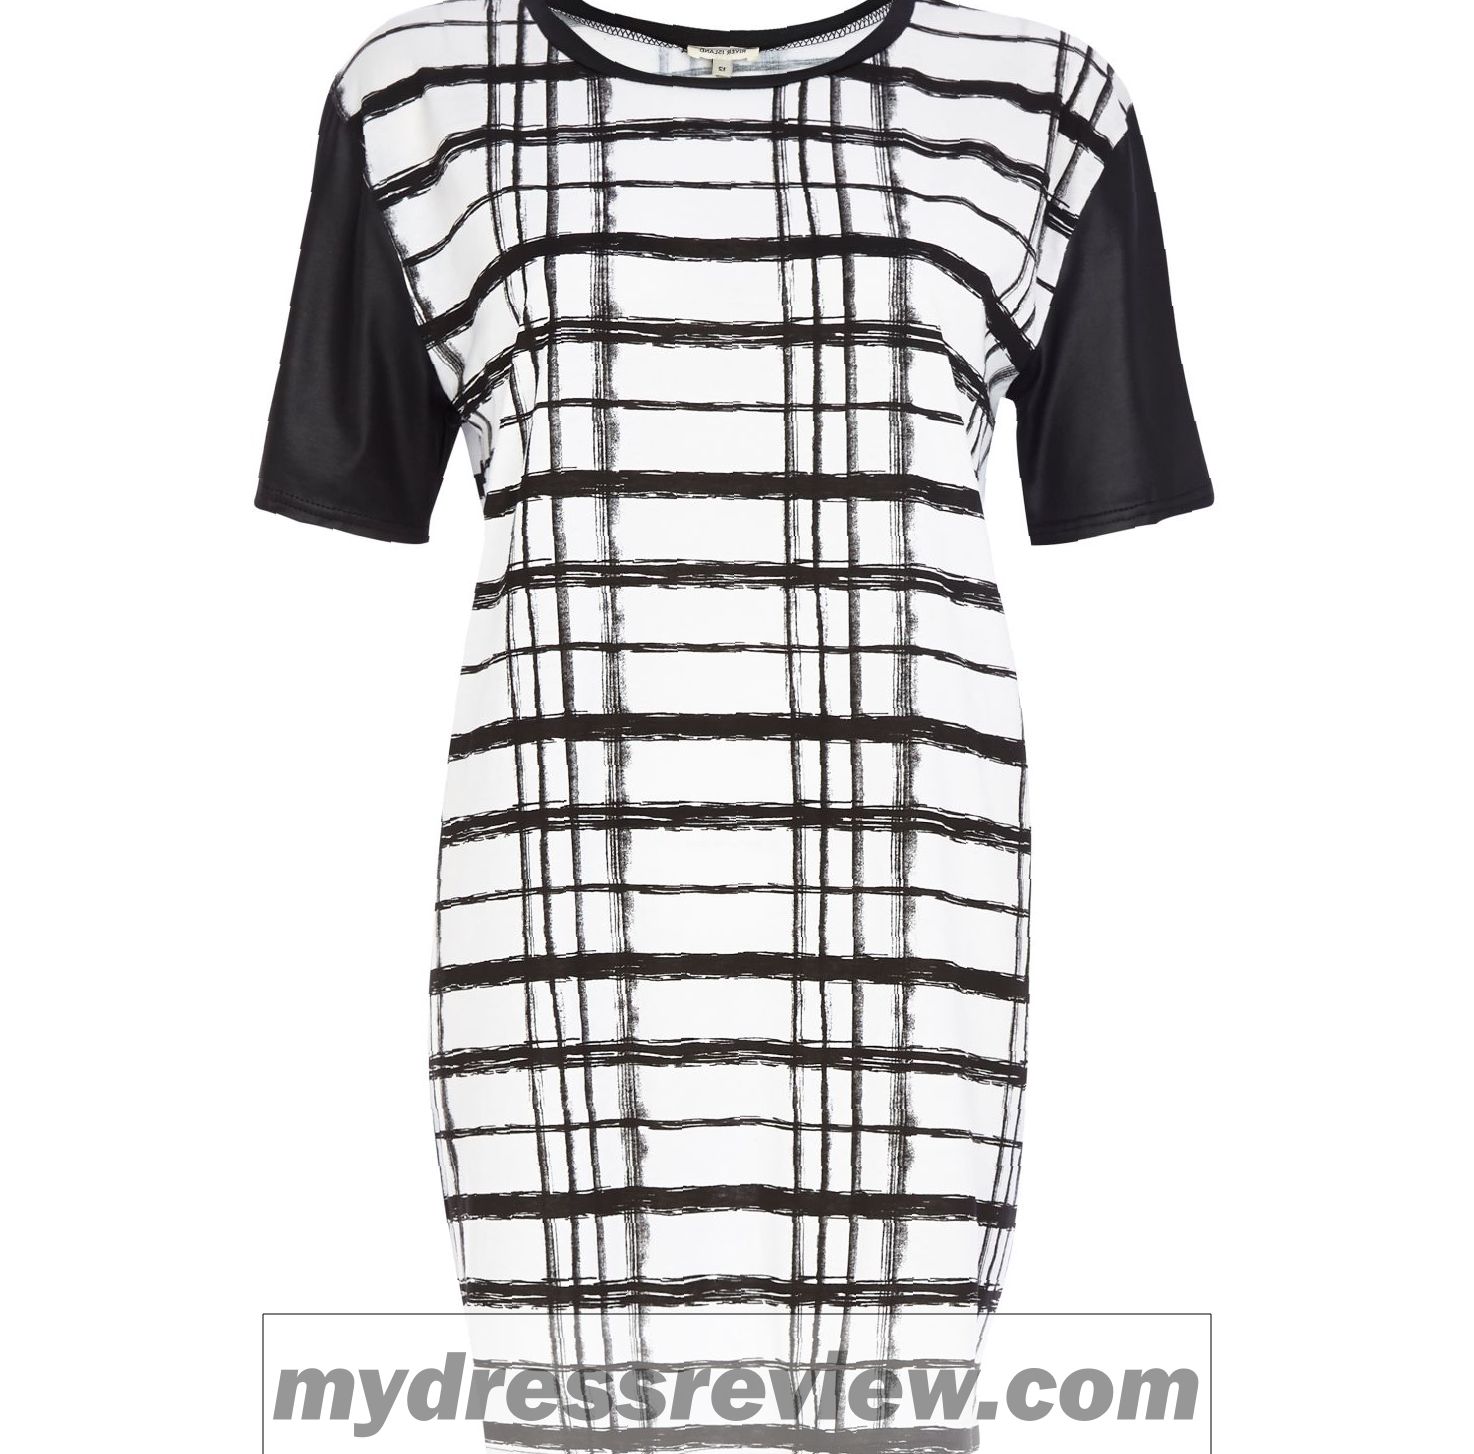 Black And White River Island Dress - The Trend Of The Year